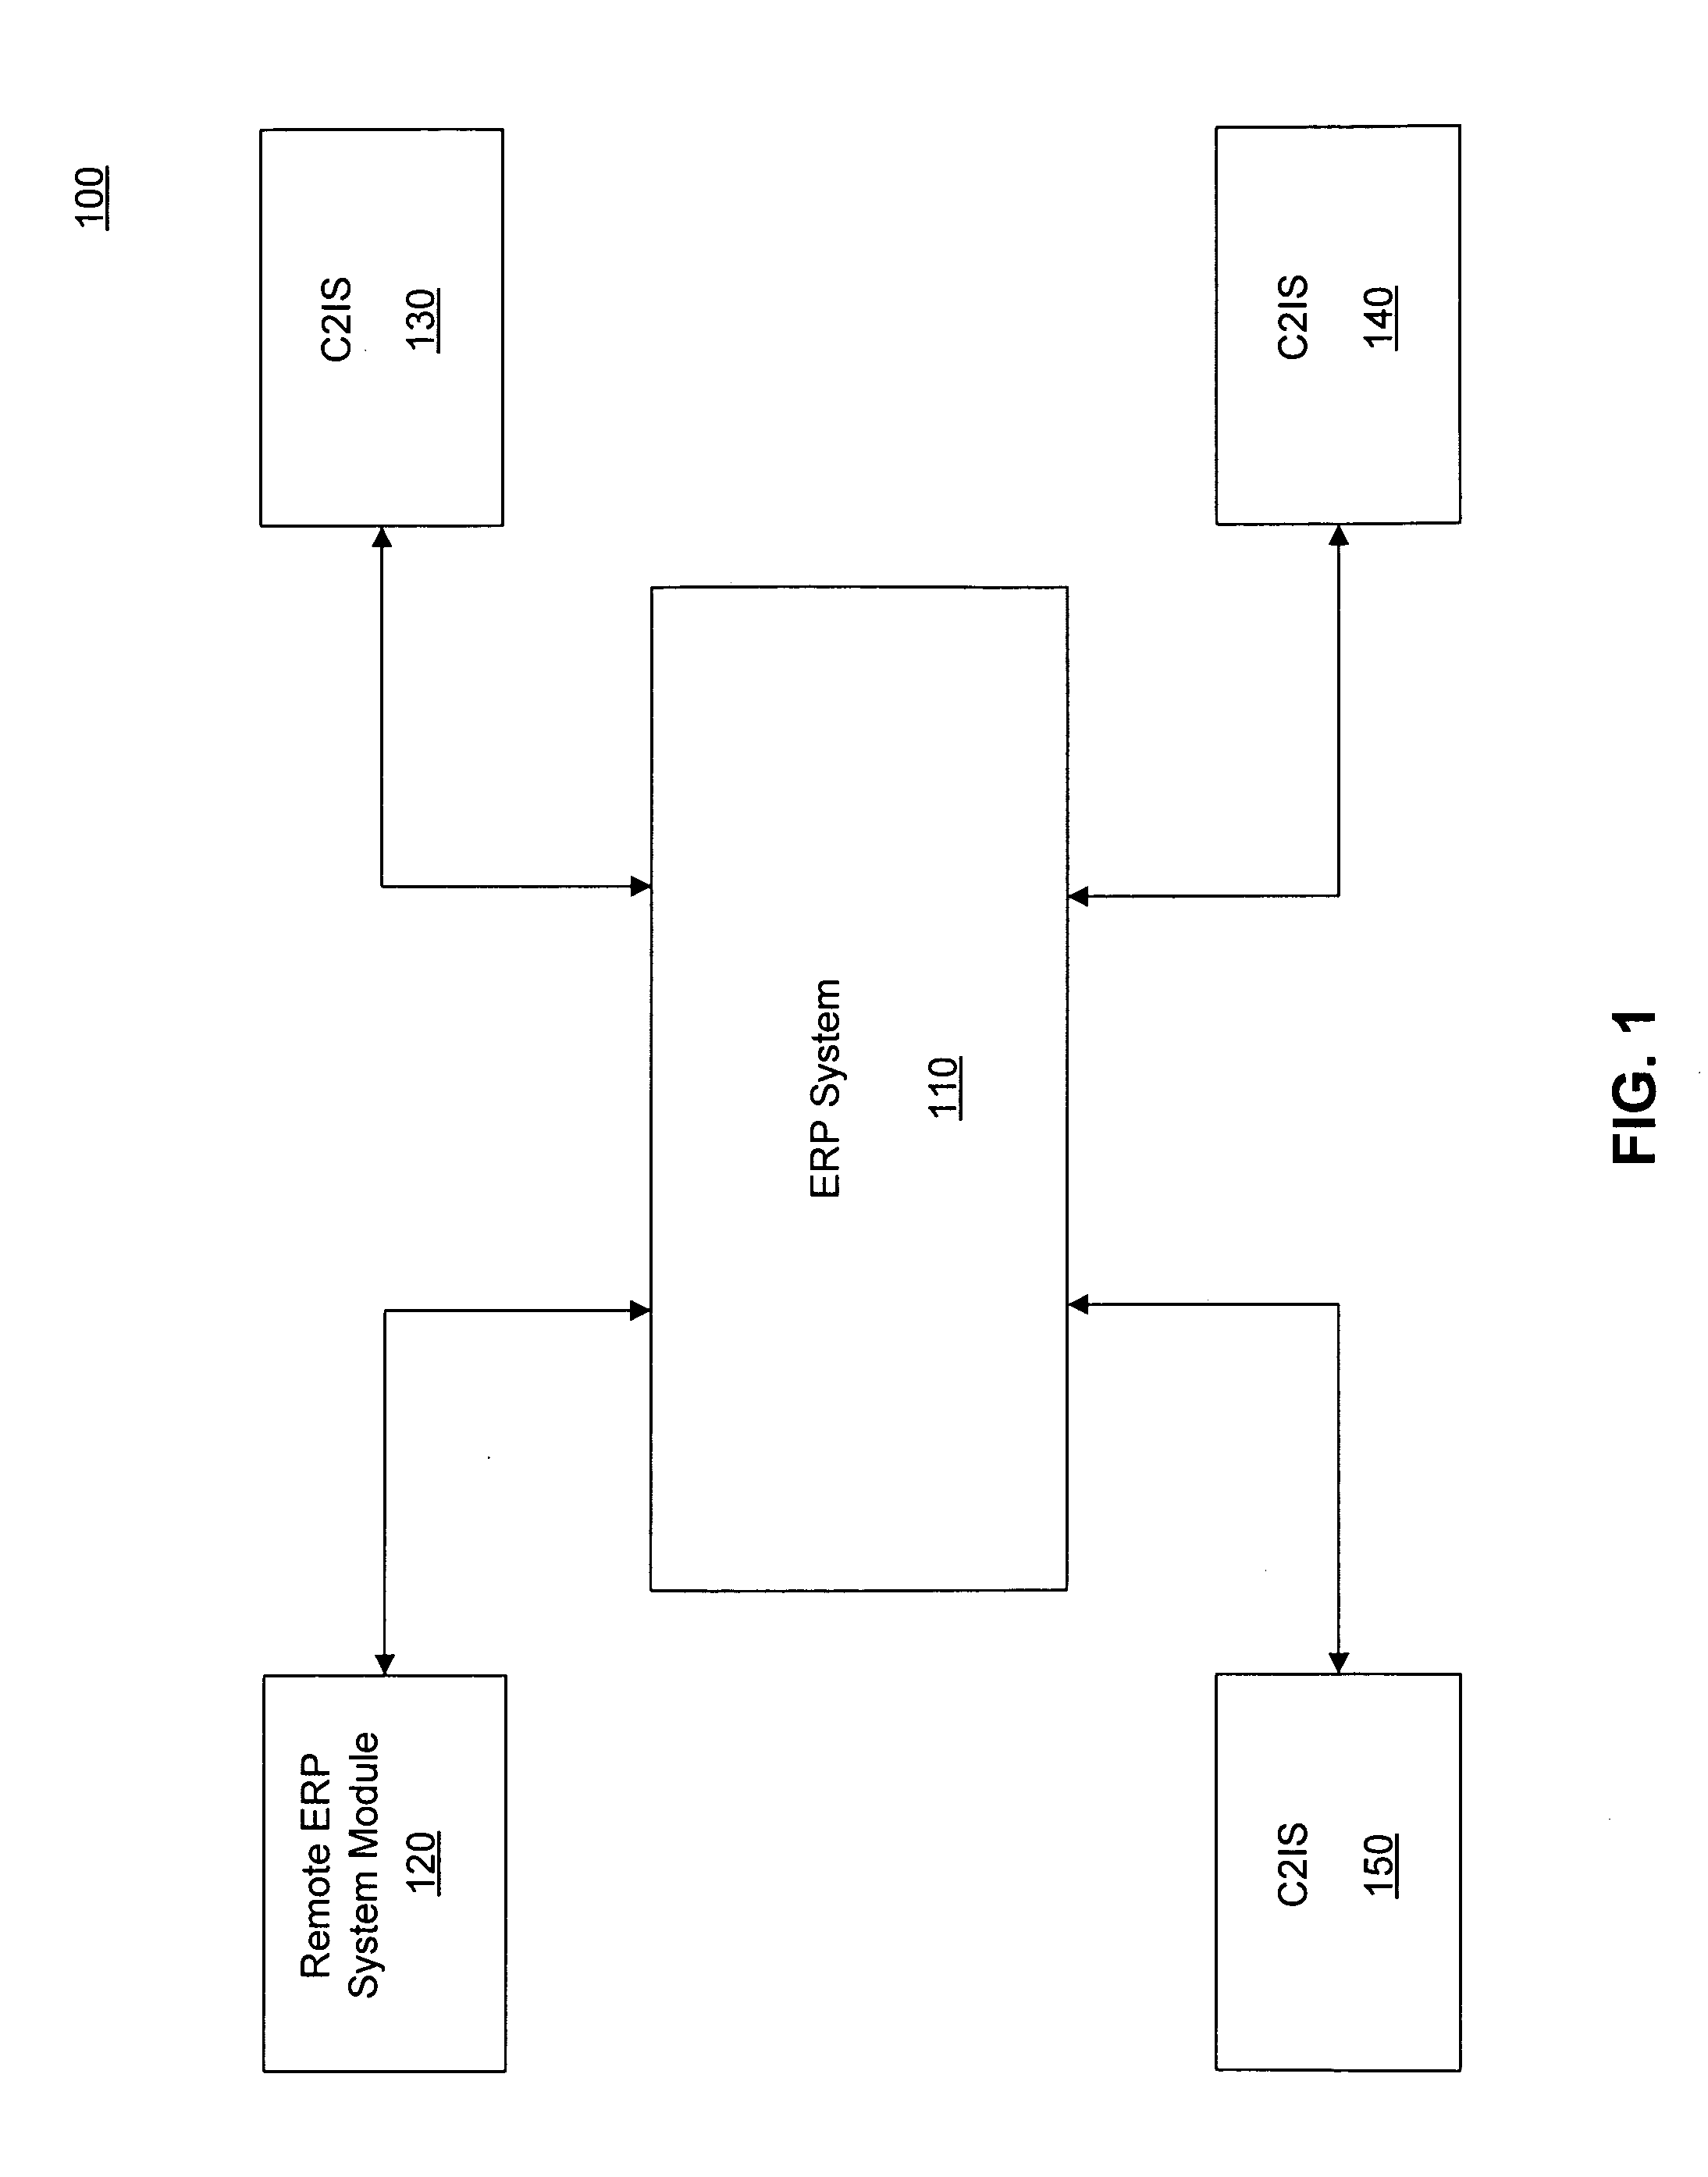 Methods and systems for exchanging data between a command and control information system and an enterprise resource planning system